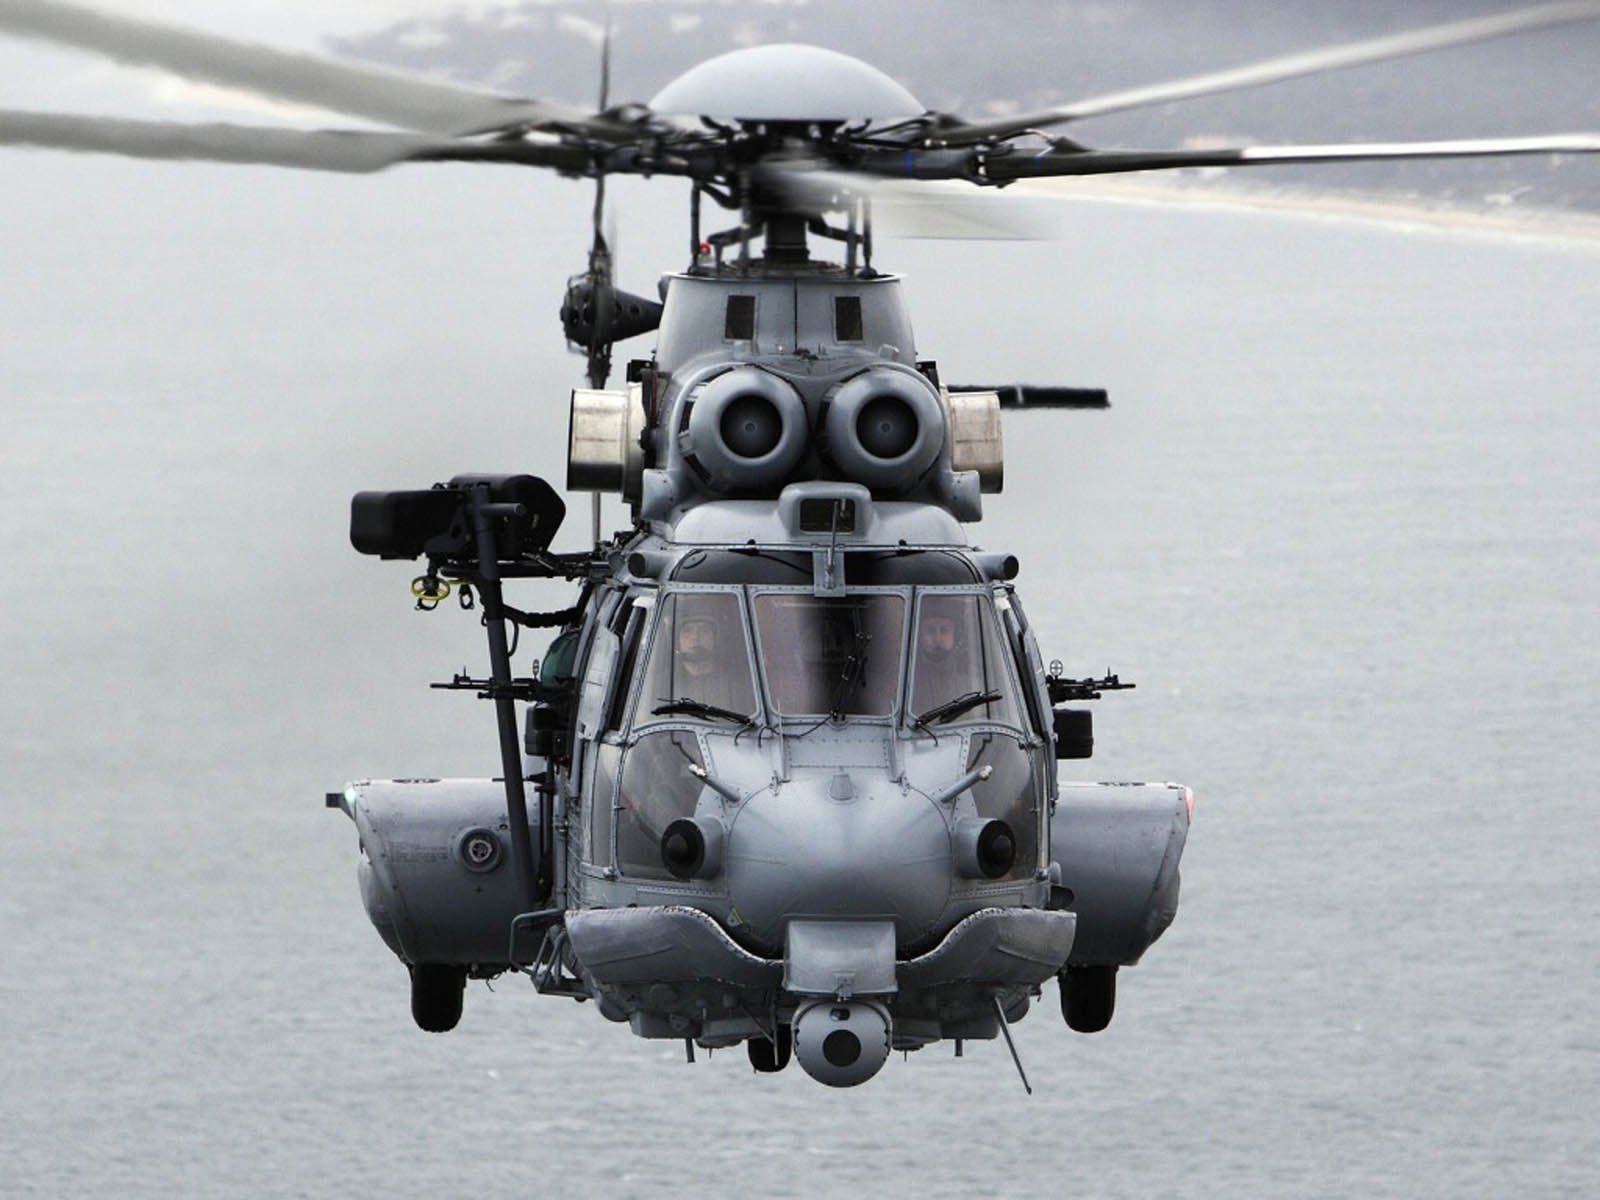 Tag Military Helicopter Wallpaper Image Photos Pictures And